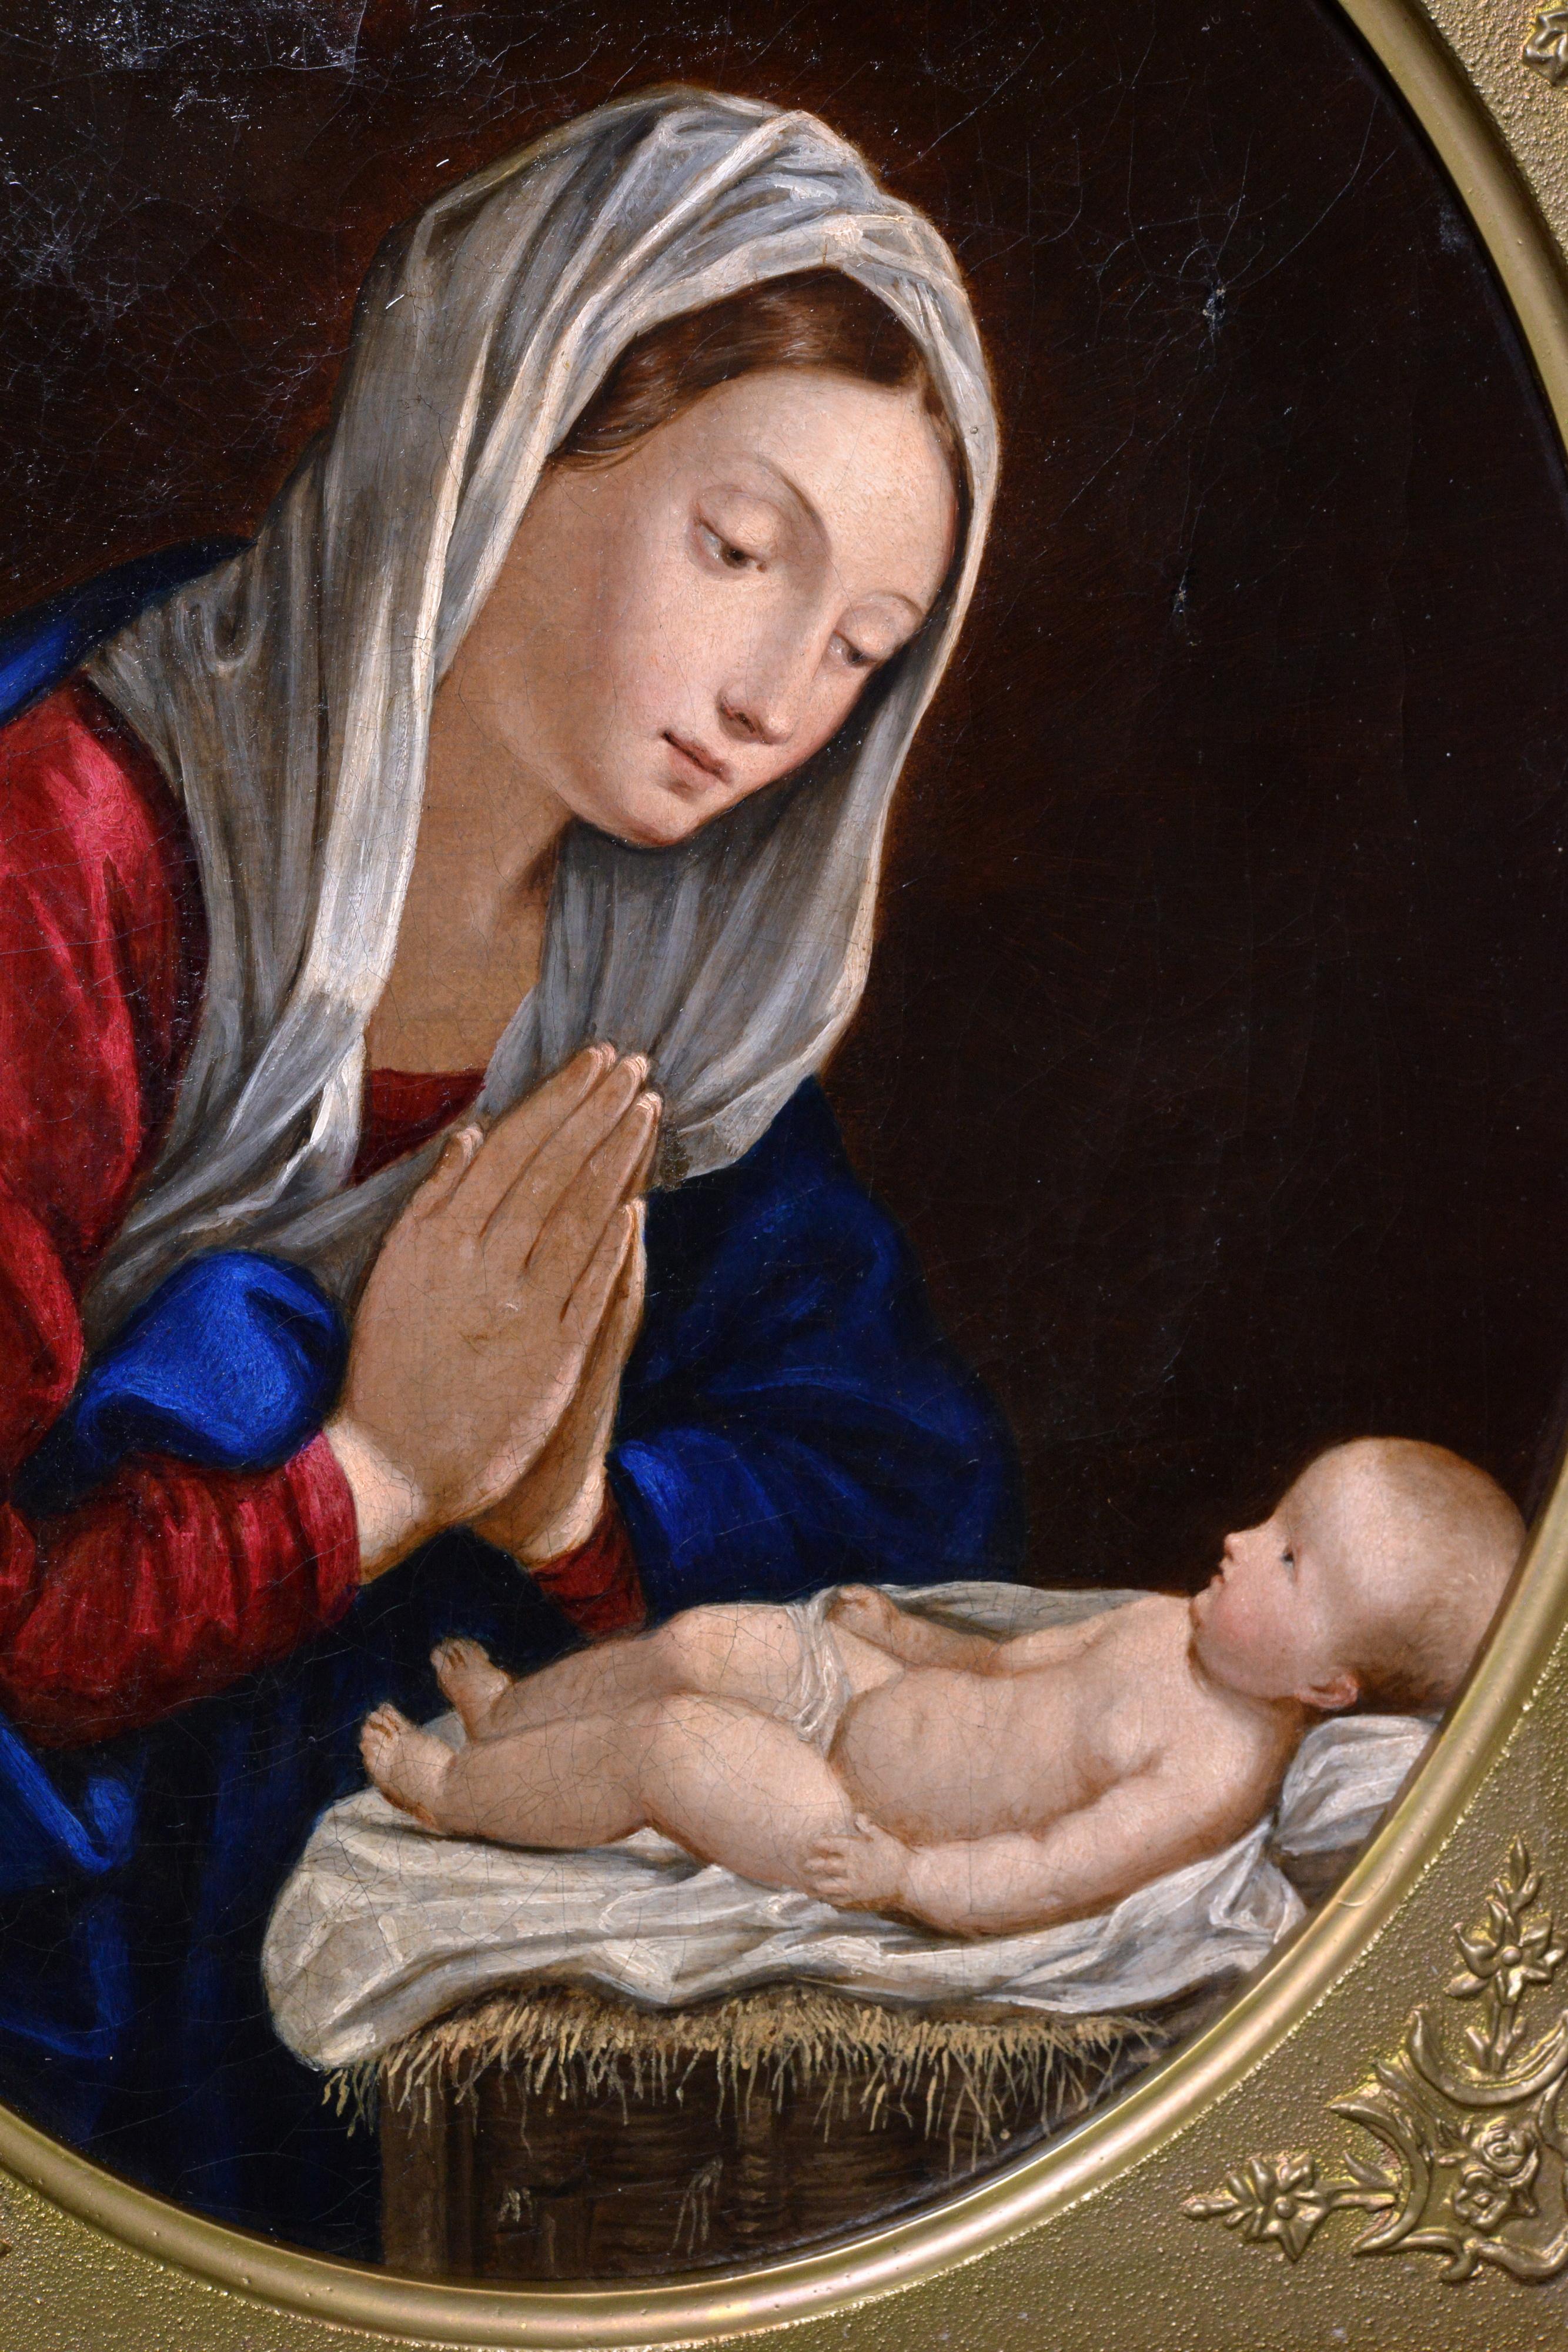 Religious scene Madonna Bending and Praying over Child 19th century Oil painting - Brown Figurative Painting by Unknown